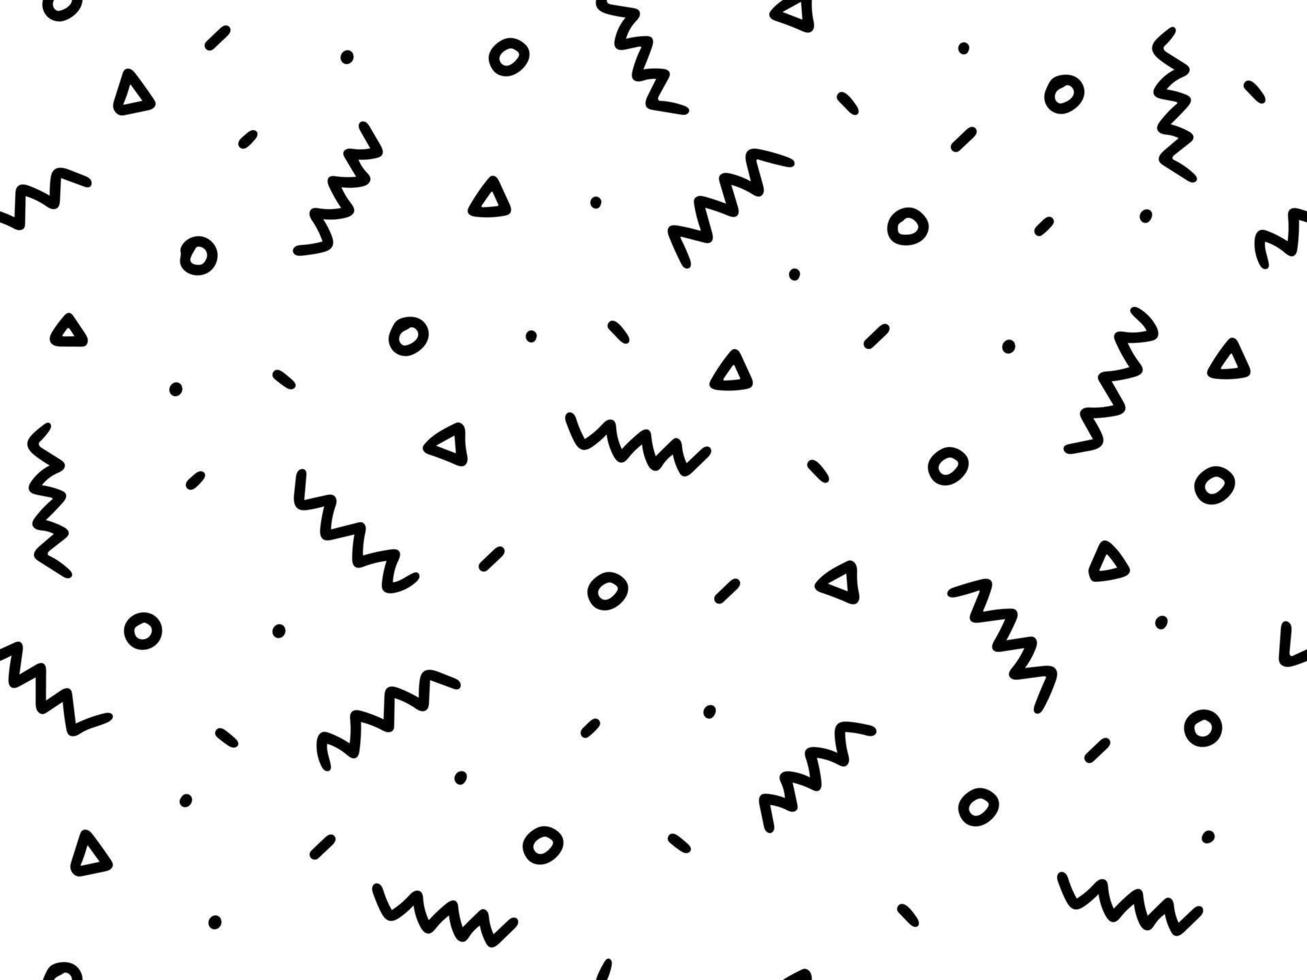 doodle hand drawn sketch style geometric pattern with black and white. triangle, line, circle. Hipster fabric memphis style vector